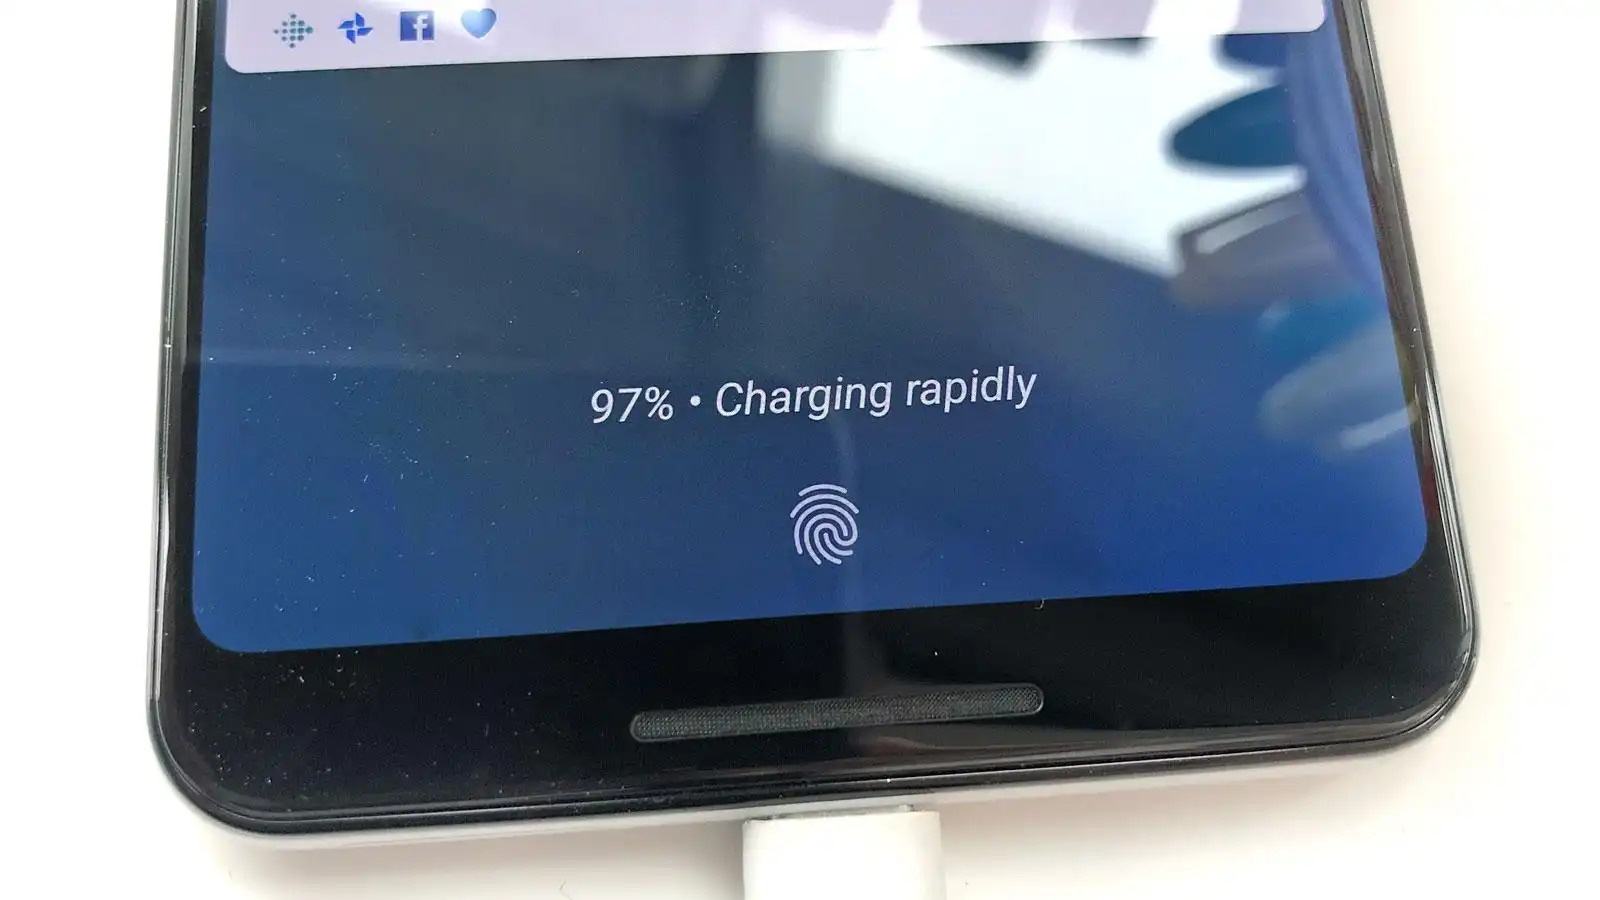 watts-dont-matter-when-fast-charging-your-phone-time-does